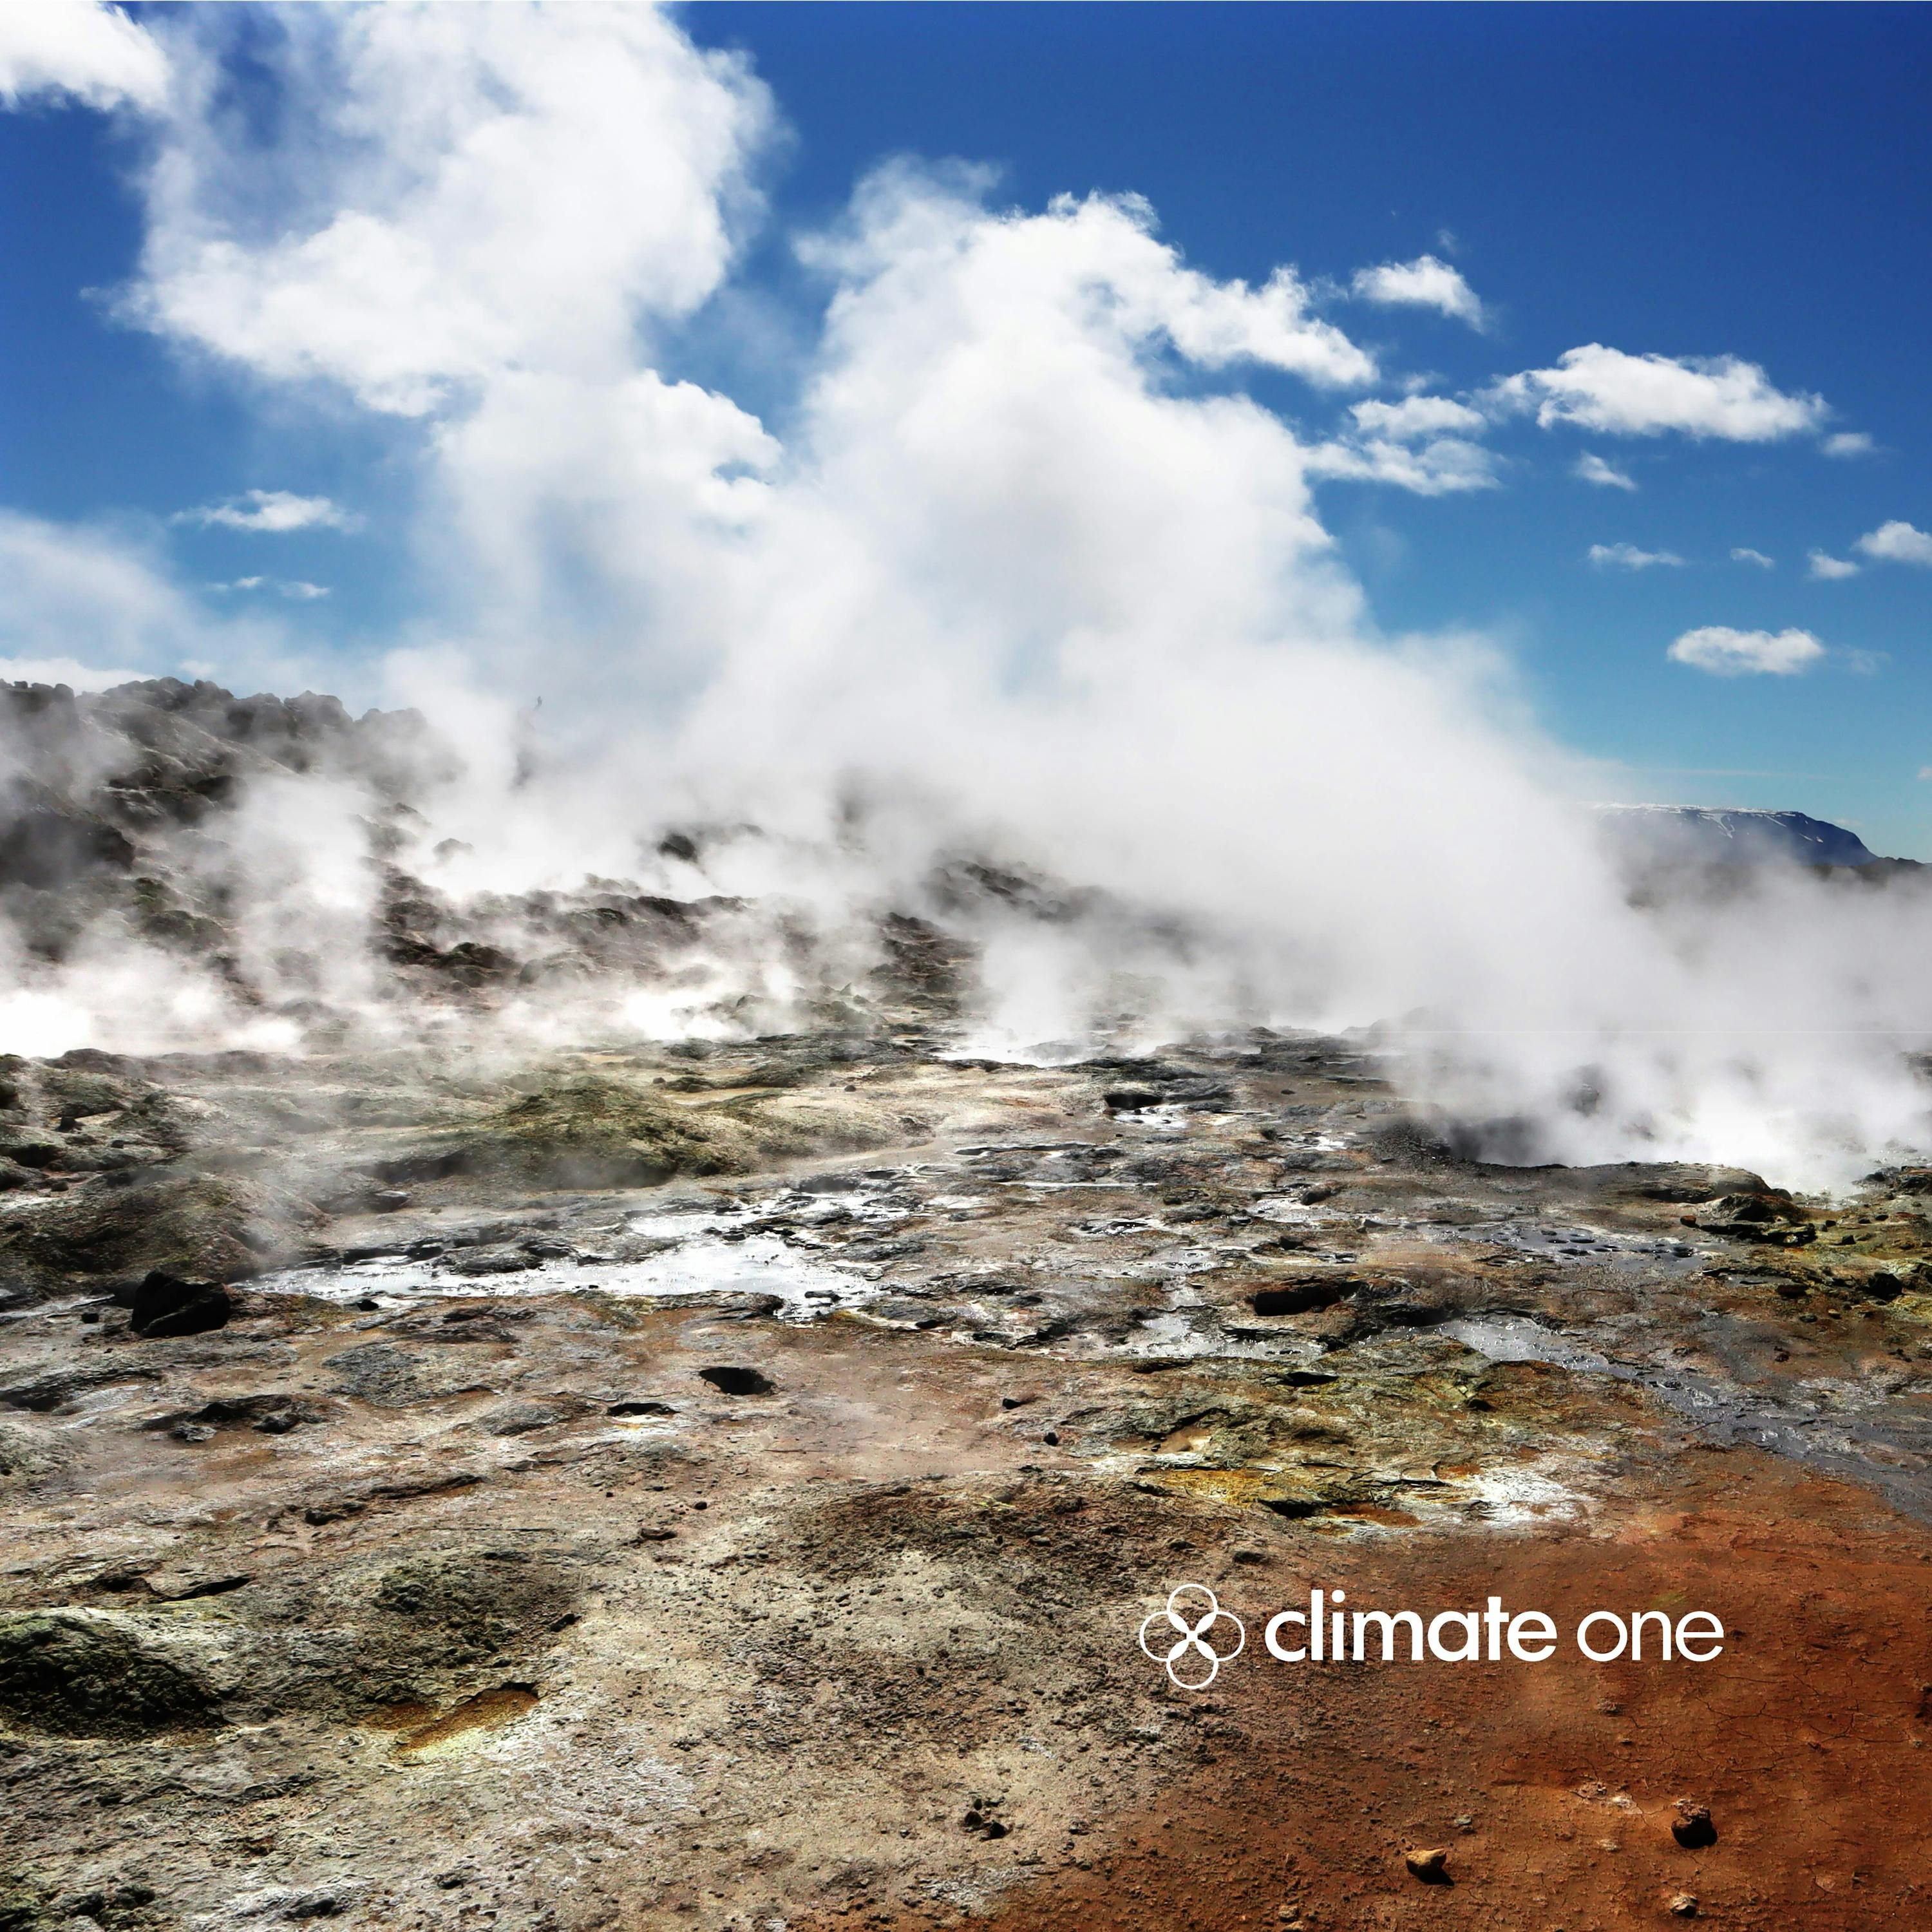 Geothermal: So Hot Right Now